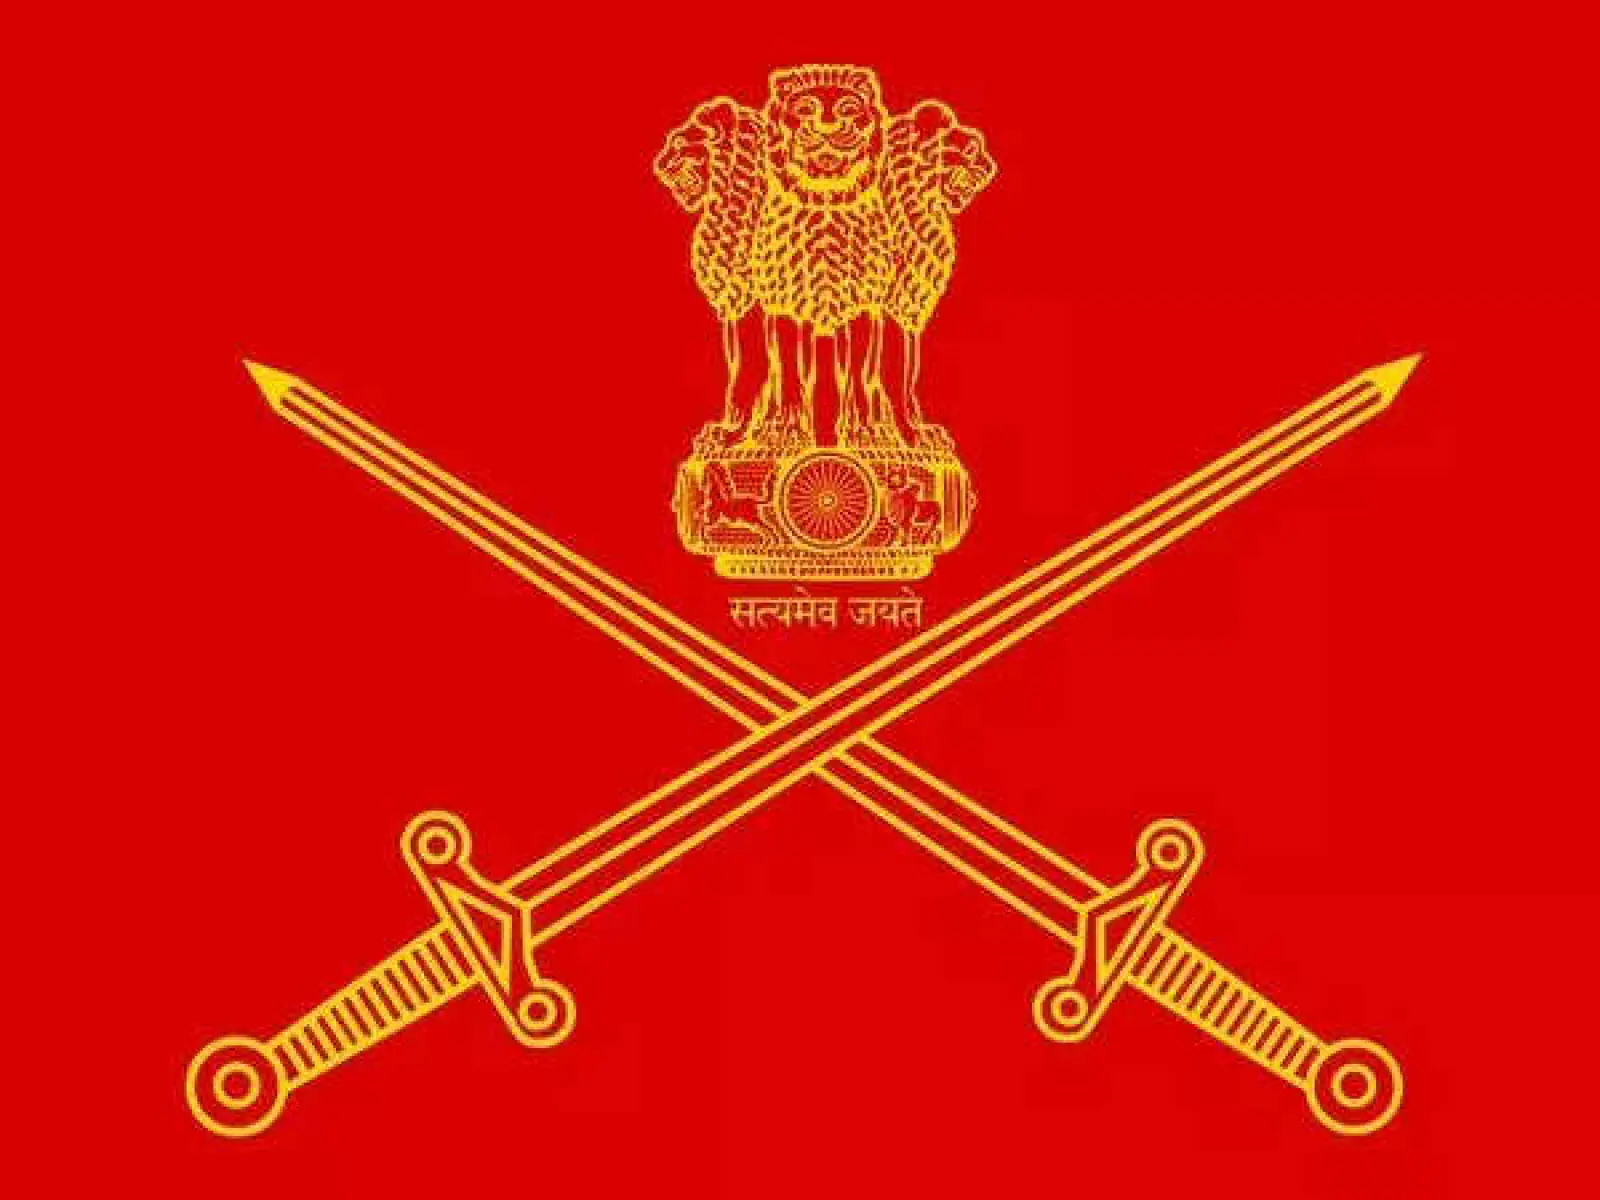 Military commanders will discuss ideological matters at the Army Commander Conference today; Defence Minister will speak on April 2